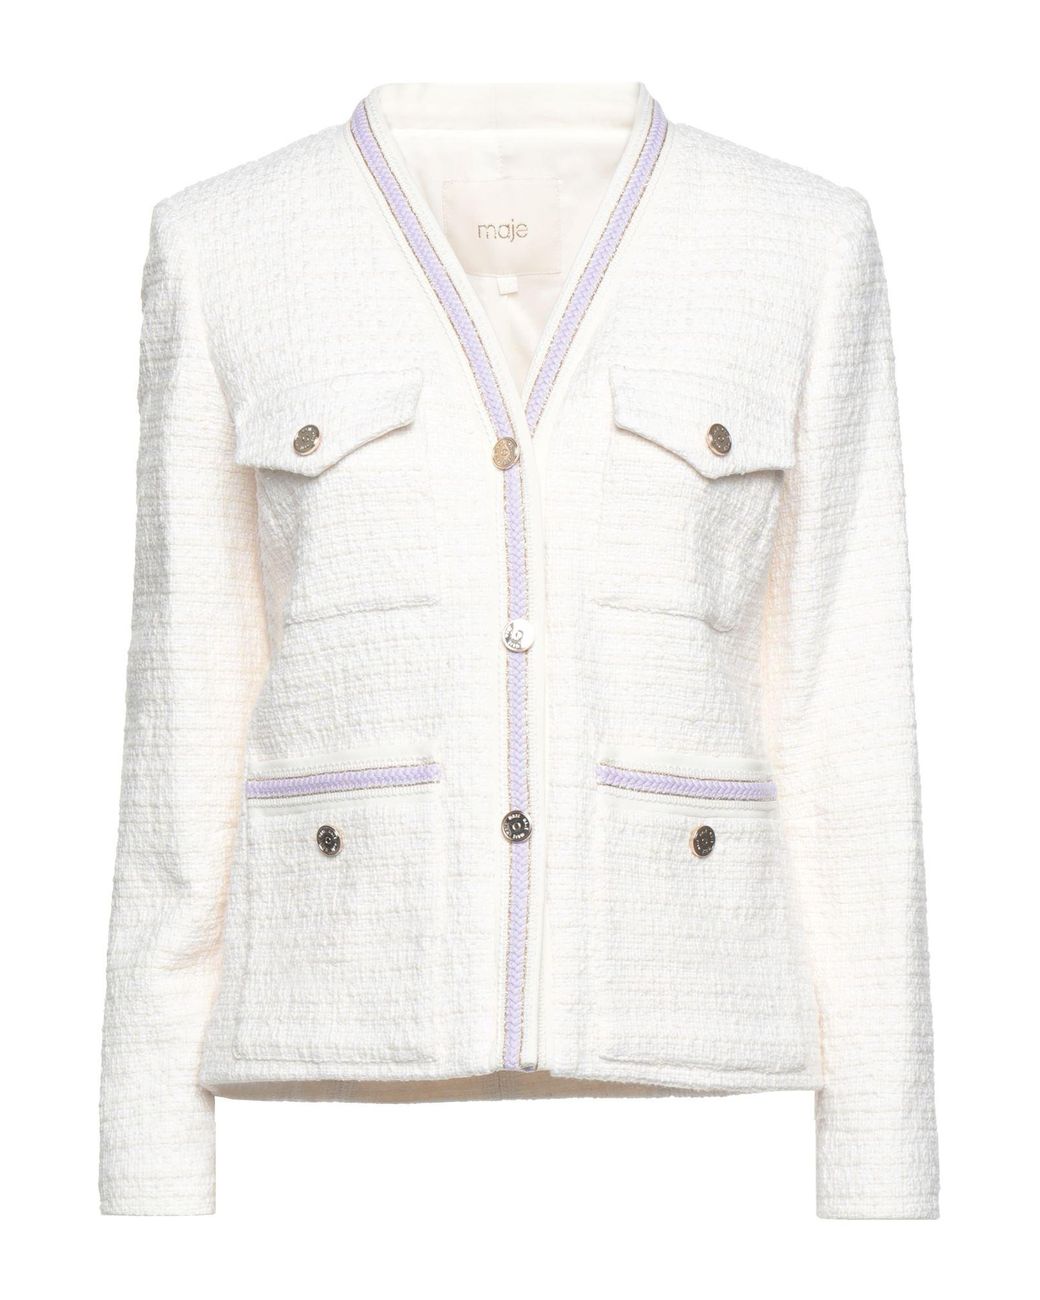 Maje Tweed Suit Jacket in Ivory (White) | Lyst